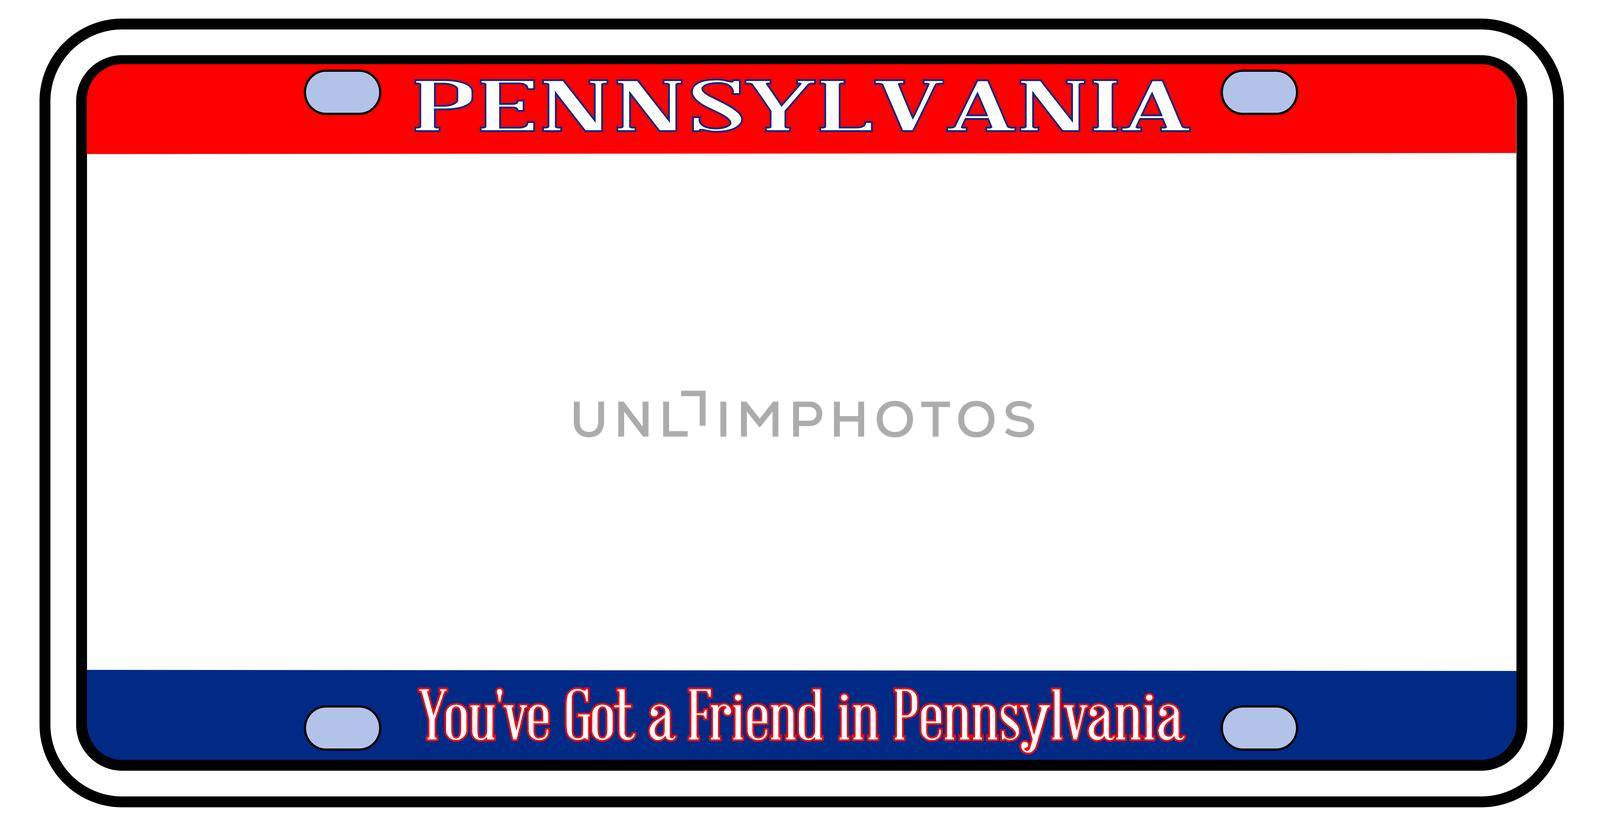 Blank Pennsylvania license plate in the colors of the state flag over a white background